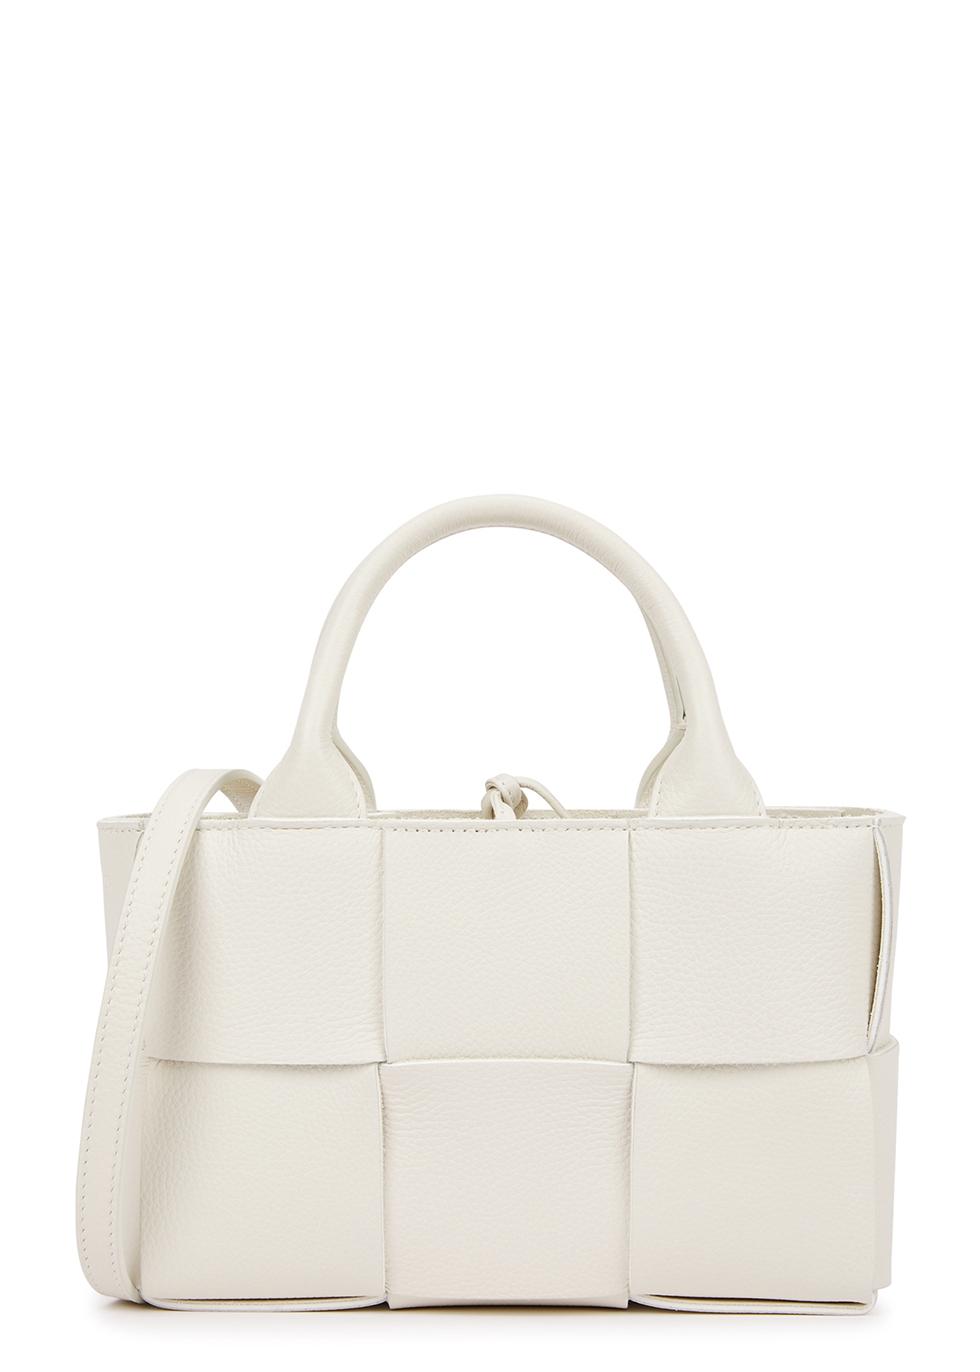 Bottega Veneta Candy Arco Small Leather Top Handle Bag in Natural | Lyst